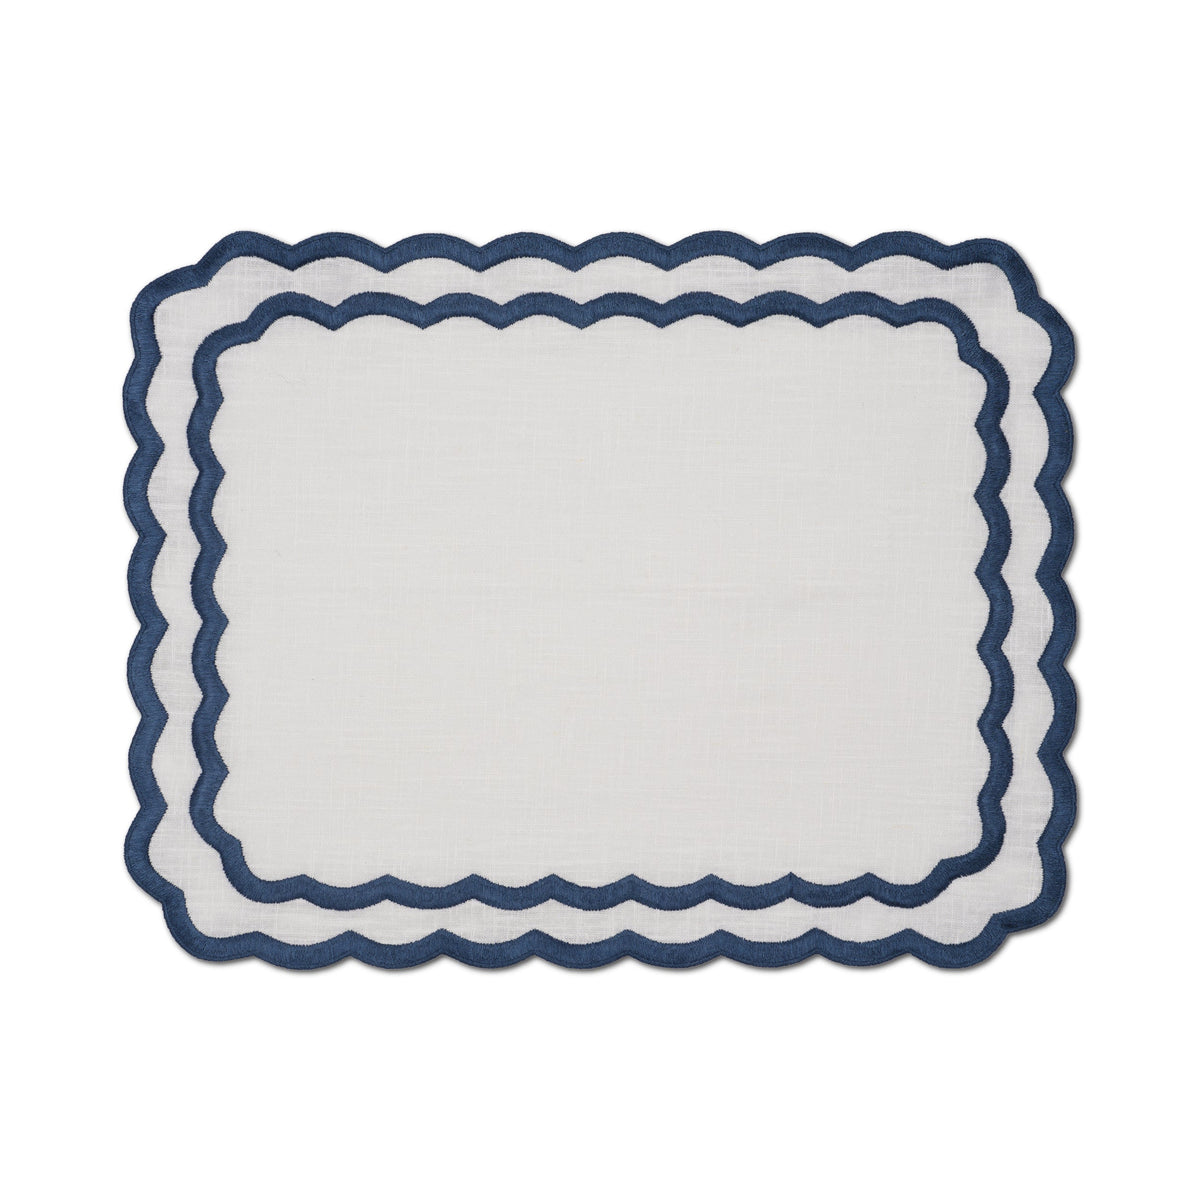 Marigold Placemat in White Midnight Blue, Set of 4